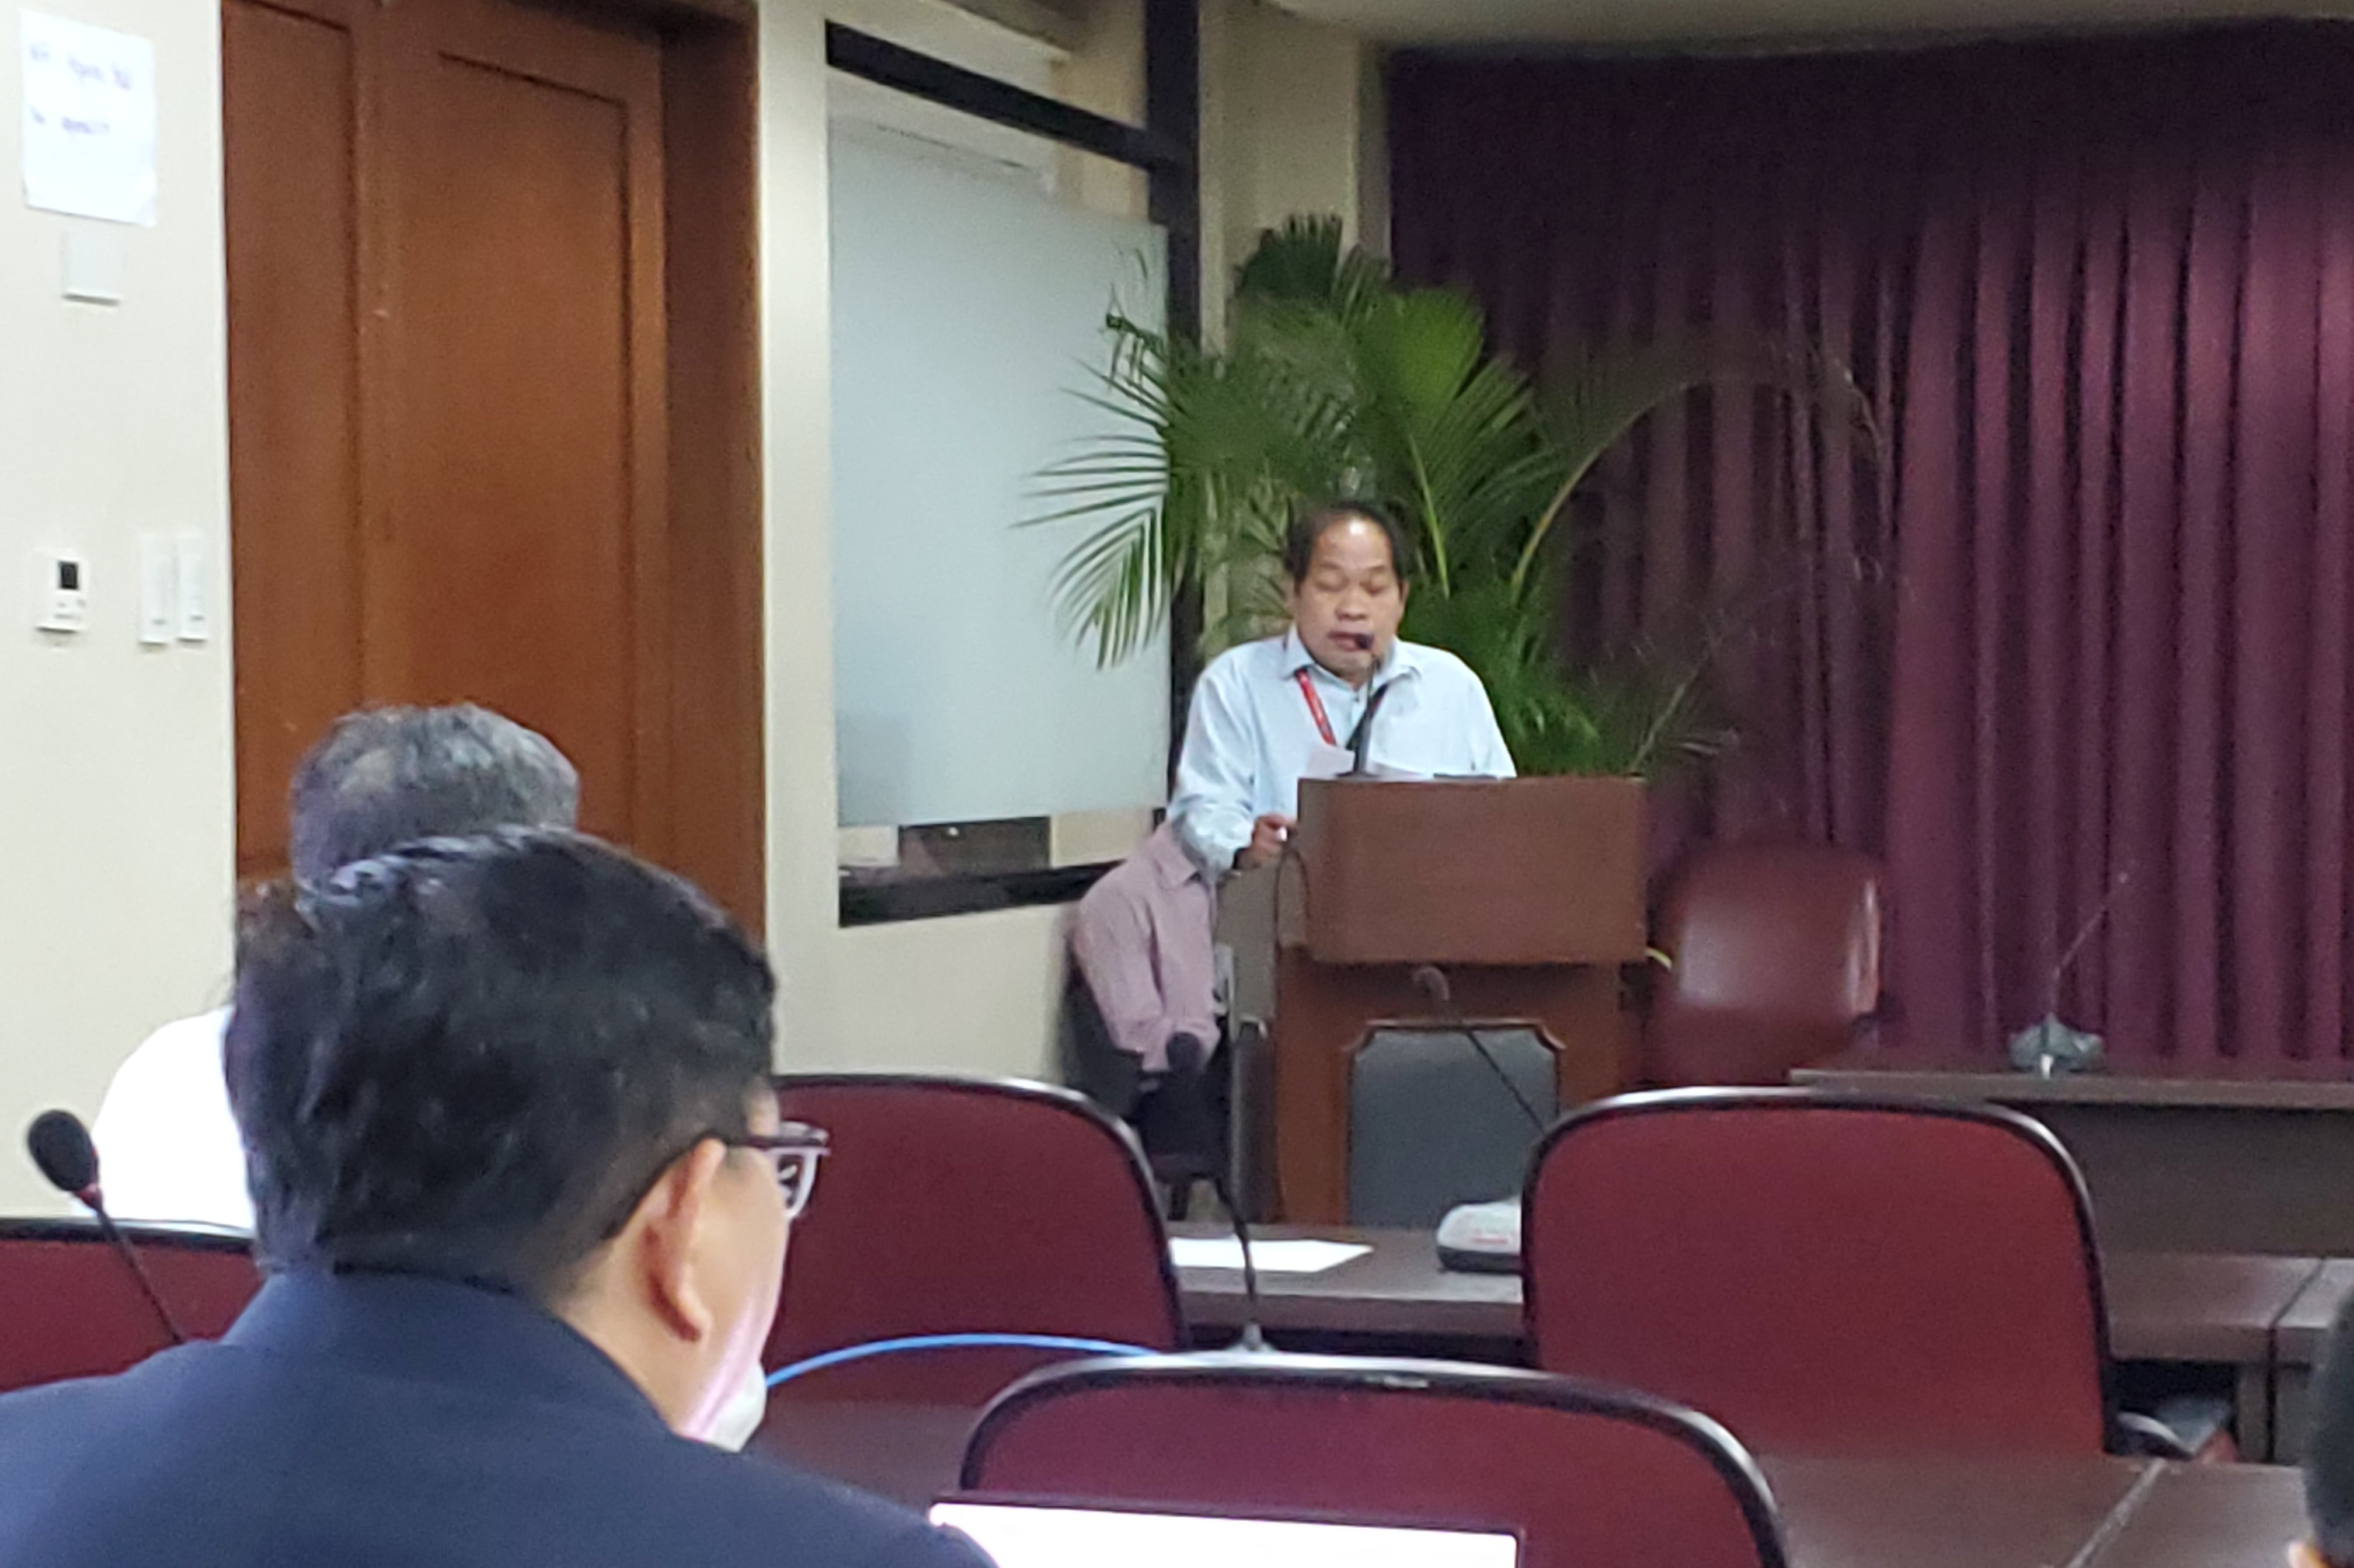 CPBRD Executive Director Manuel Aquino giving the Opening Remarks